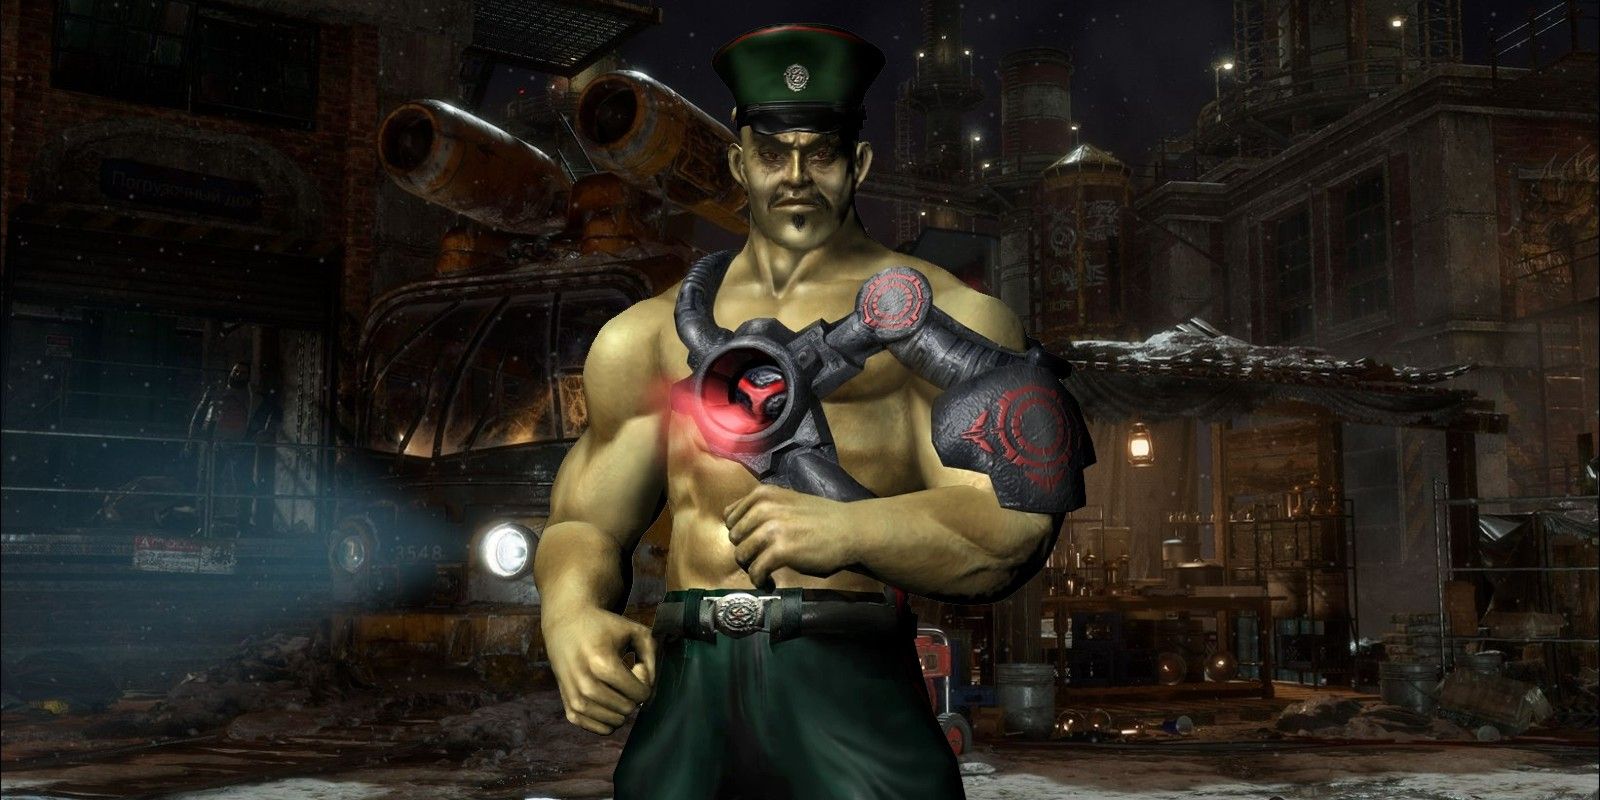 Hsu Hao at the Black Market Alley from Mortal Kombat 11. He's shirtless, but his left arm and torso are mostly covered by the cybernetic implant that replaces his heart and gives him strength.